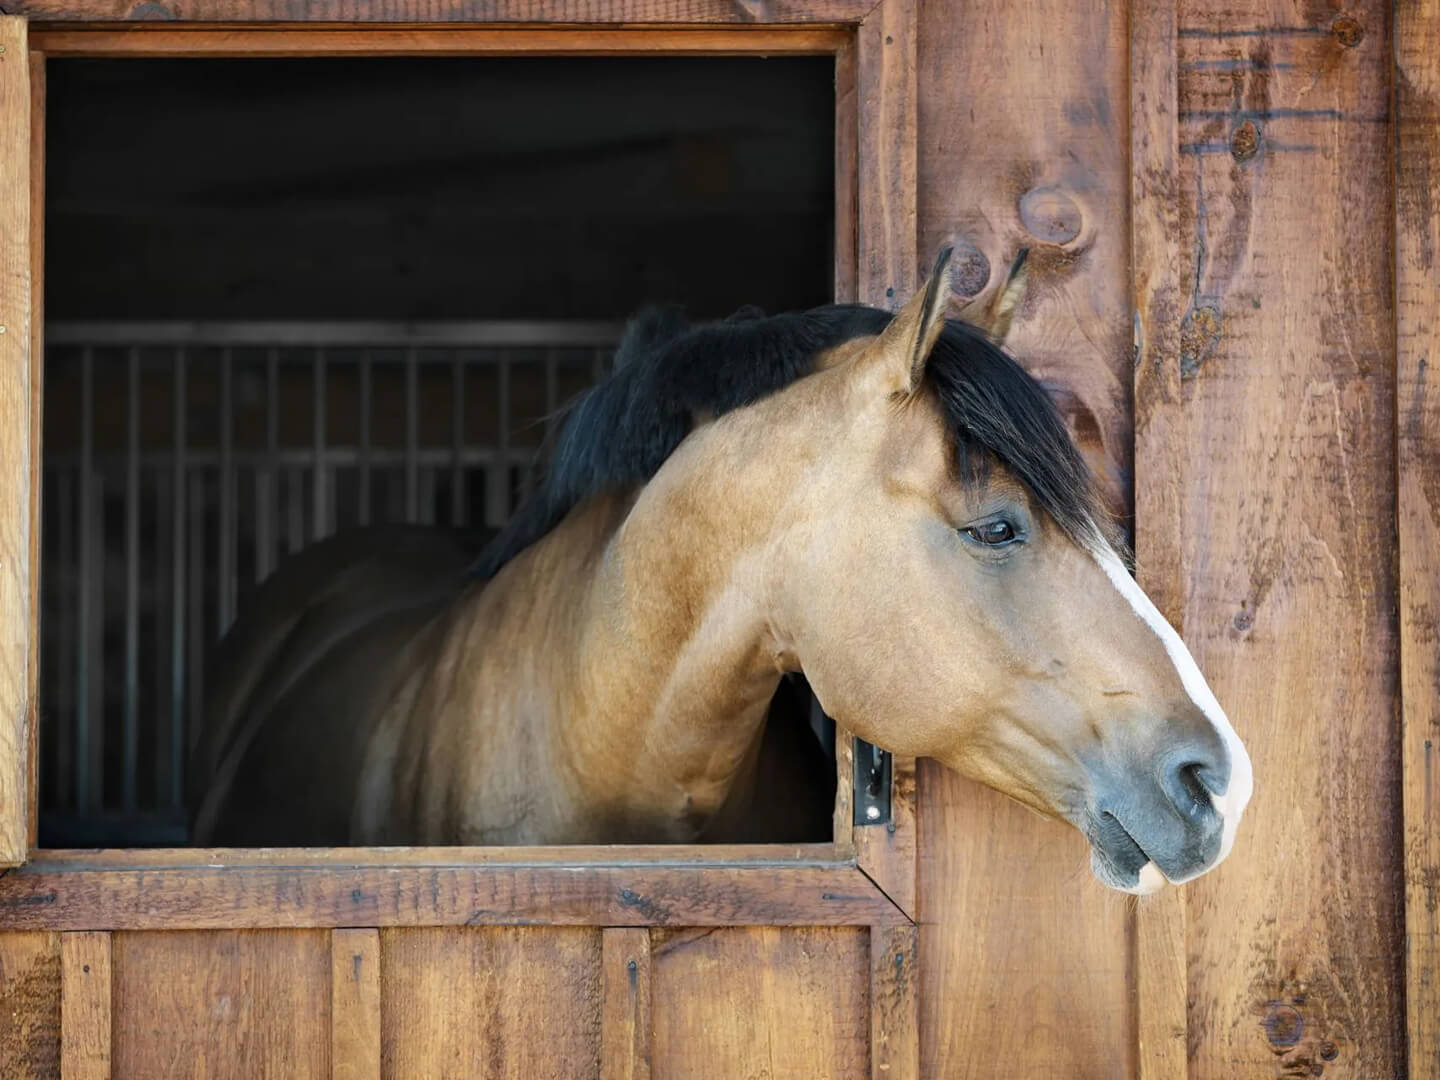 A buckskin horse poking its head out of a wooden stall